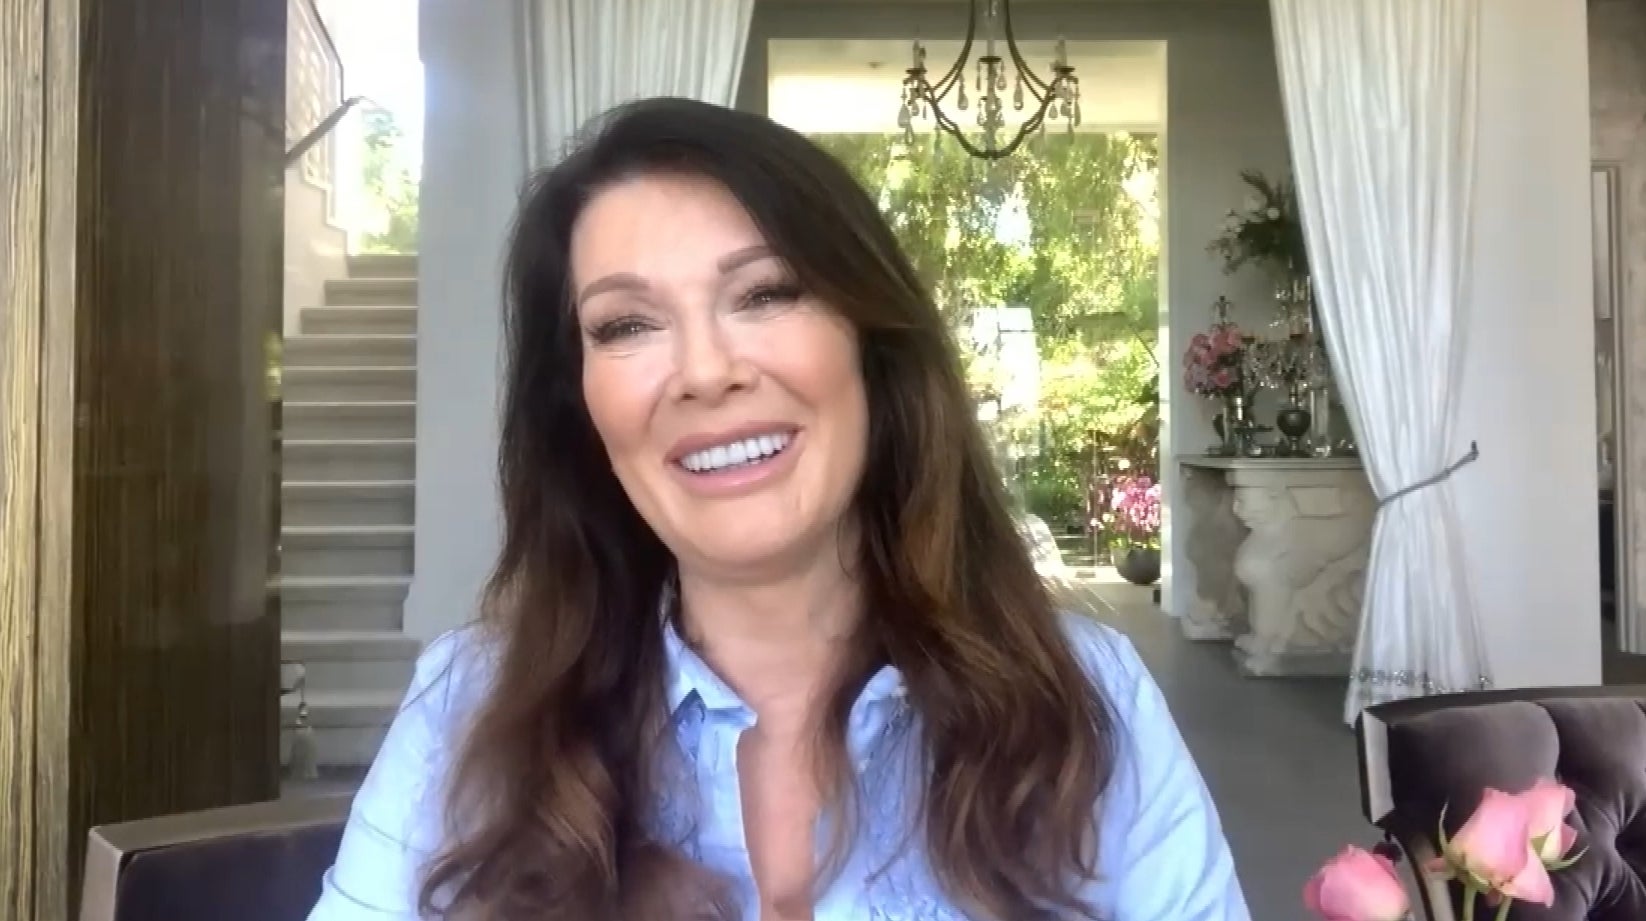 Lisa Vanderpump On What S Happening With Pump Rules Season 9 Her Podcast And That Rhobh Drama Exclusive Entertainment Tonight